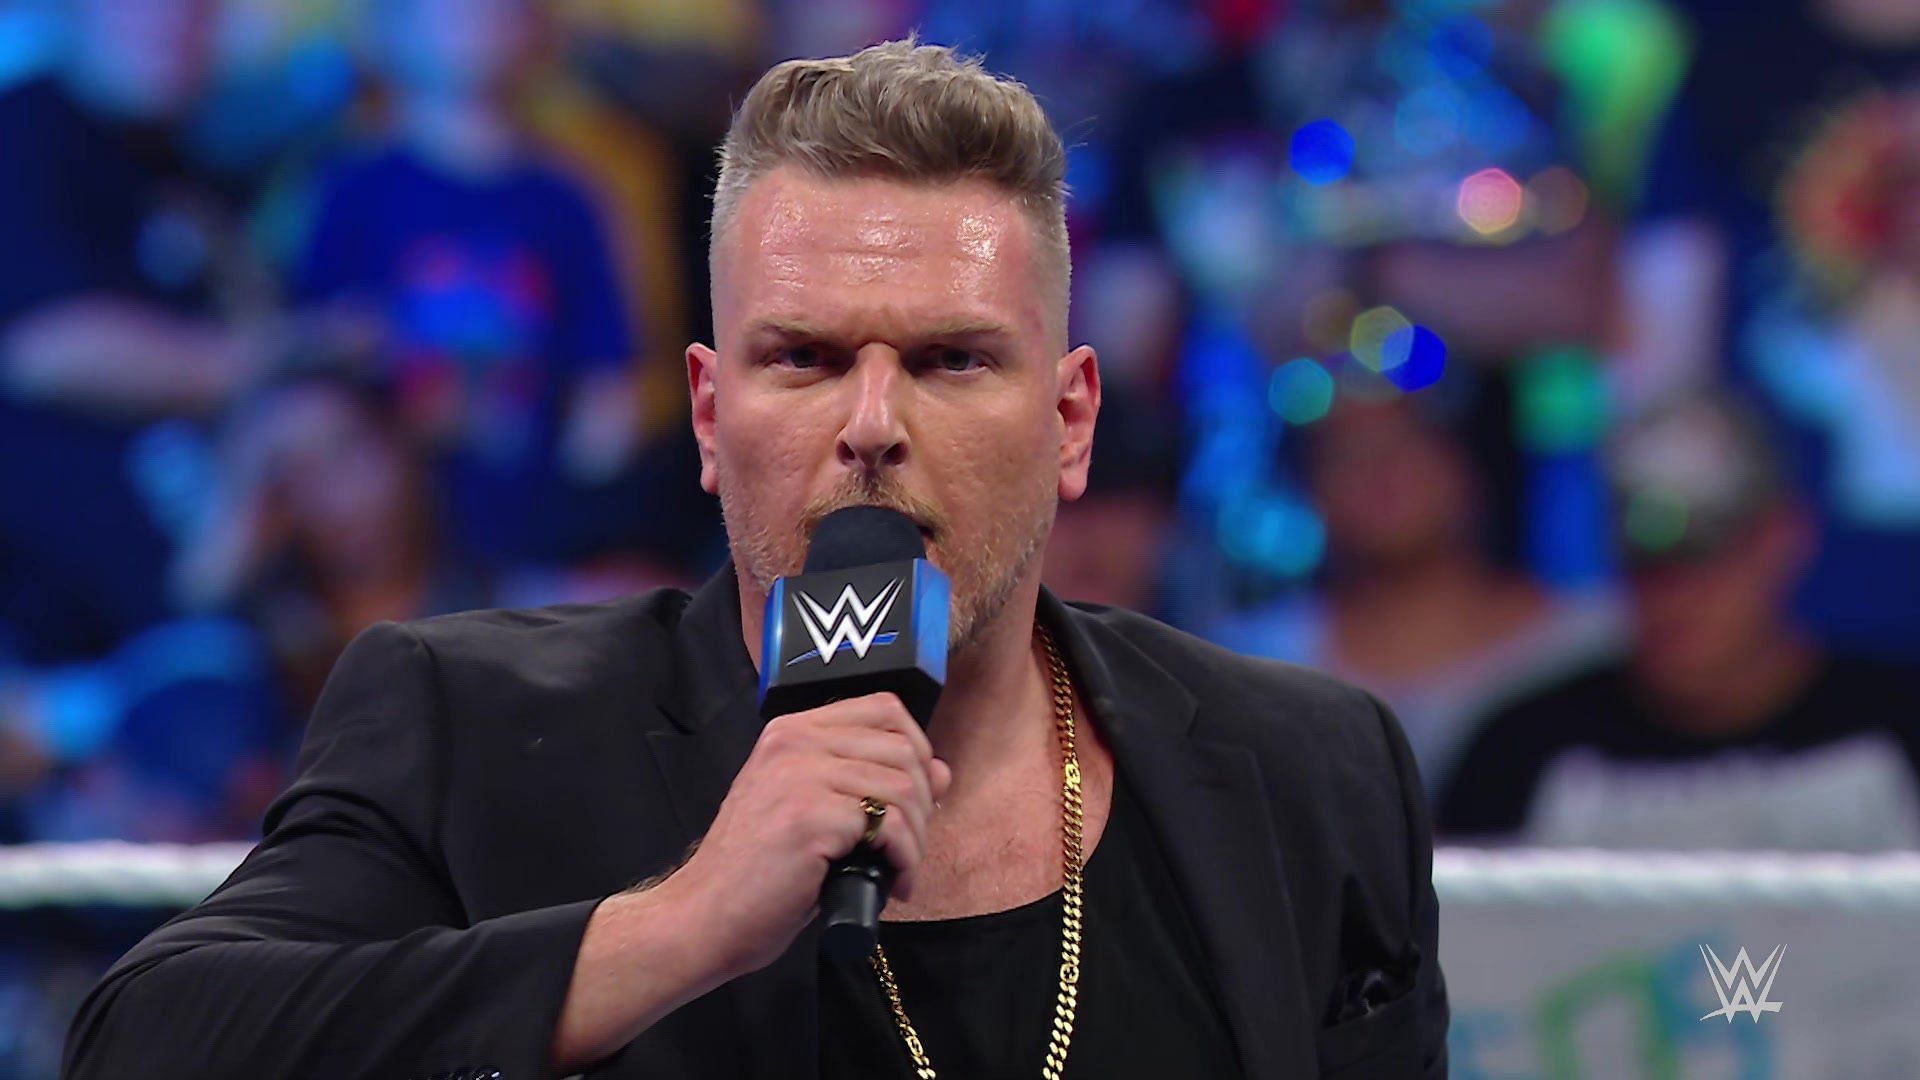 Pat McAfee on SmackDown